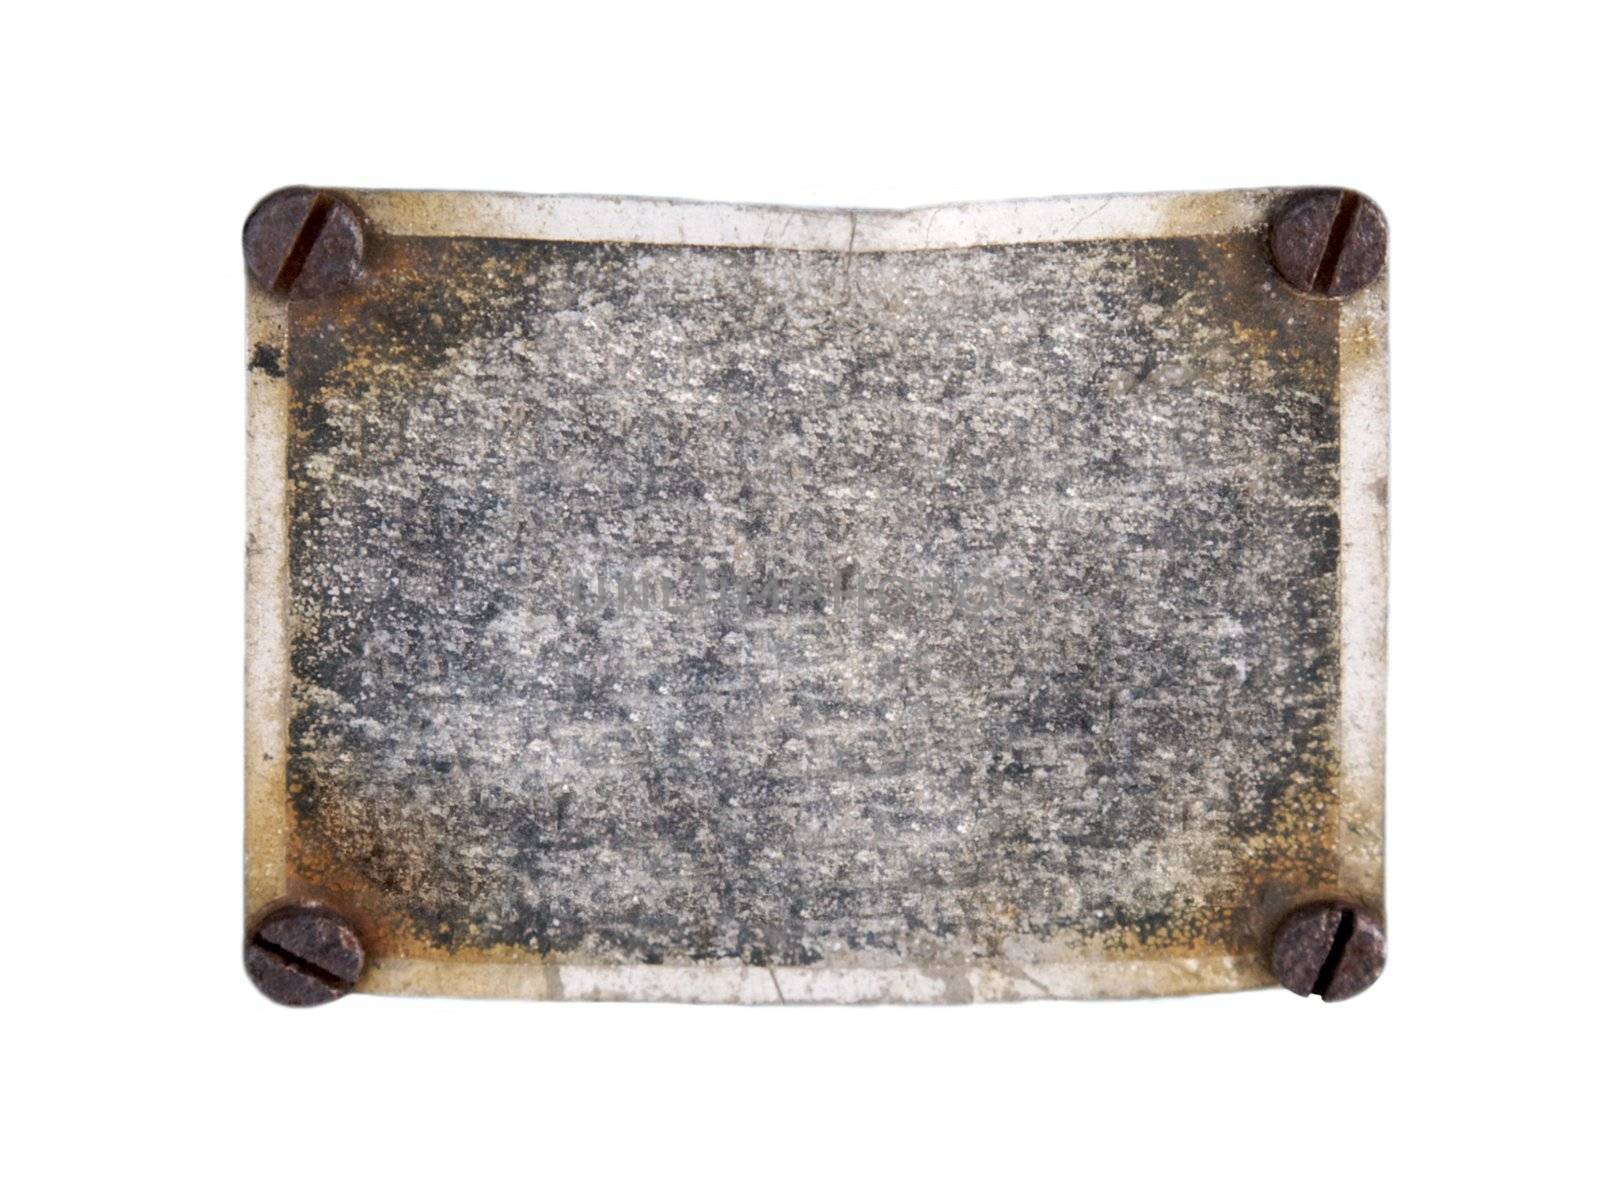 The old rusty information tablet